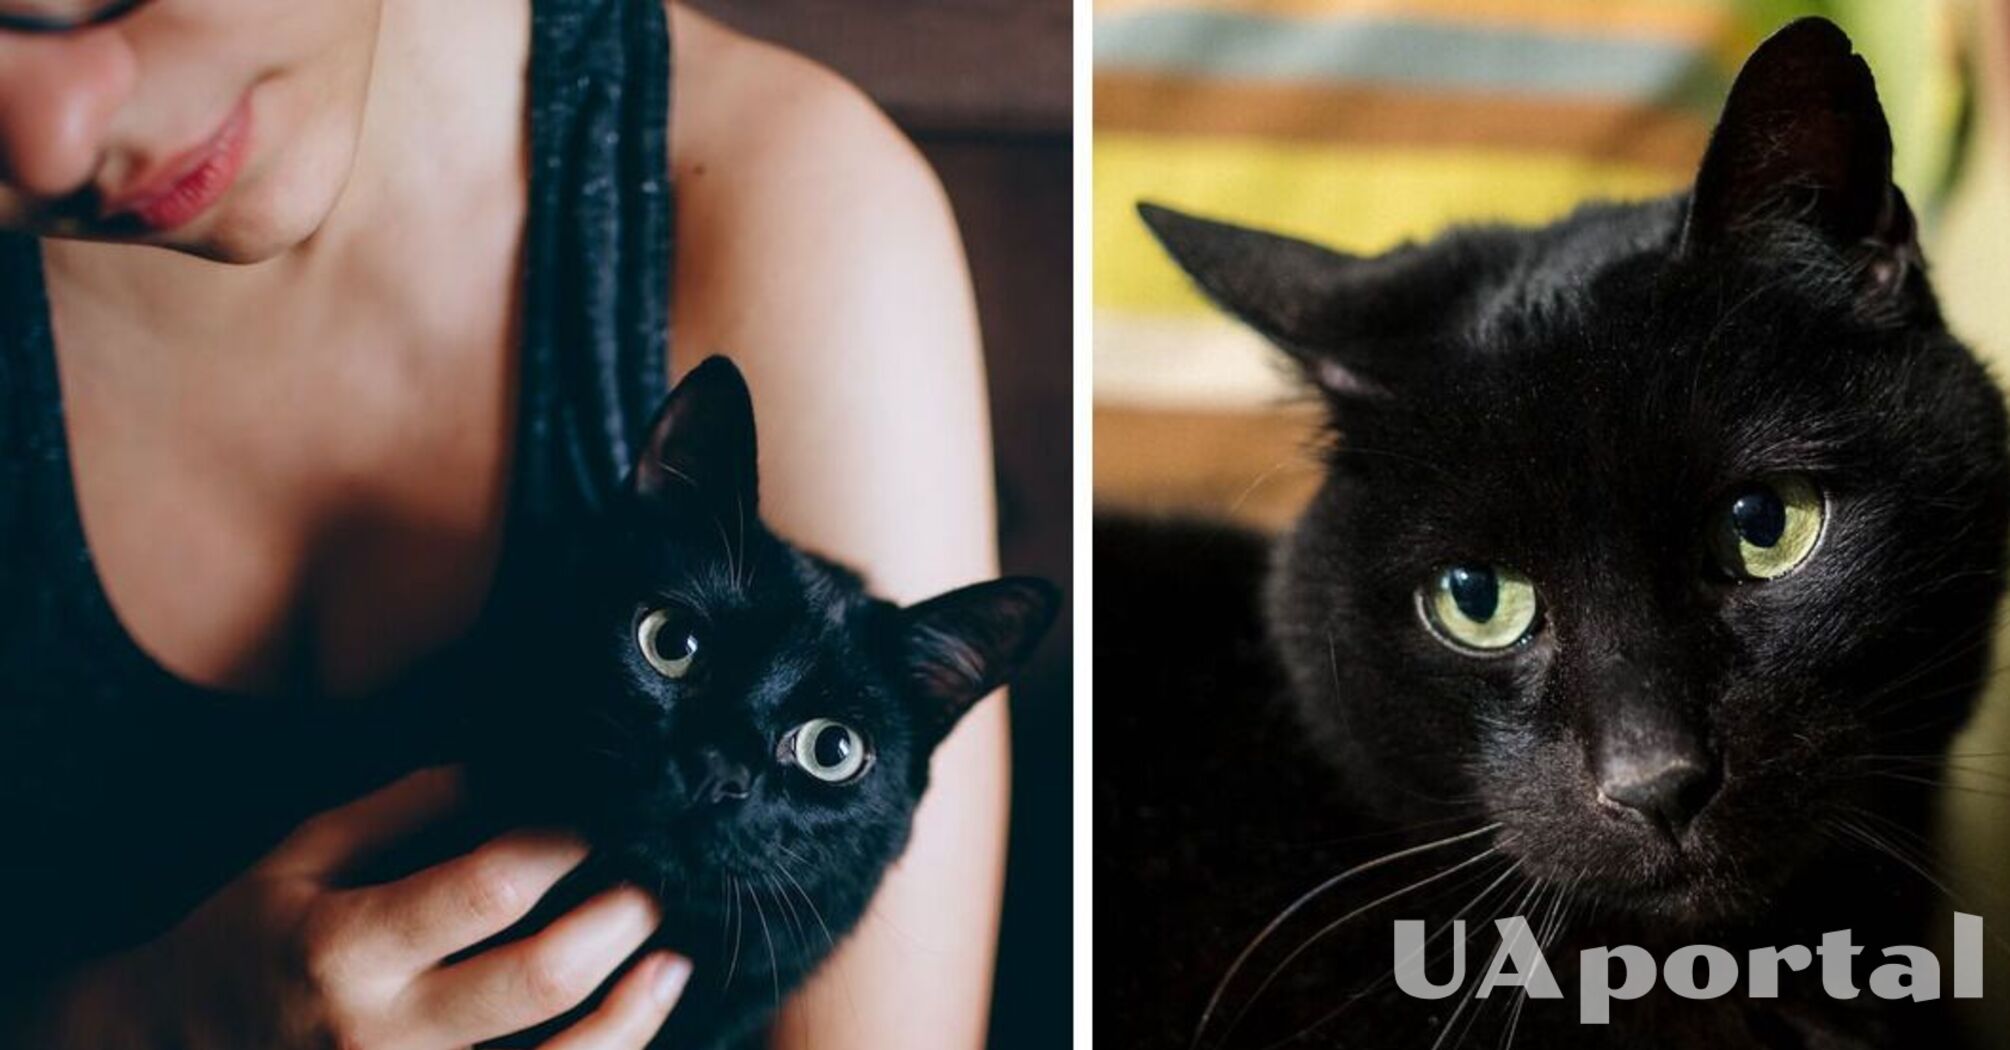 The mystery of why cats are obsessed with human armpits has been solved